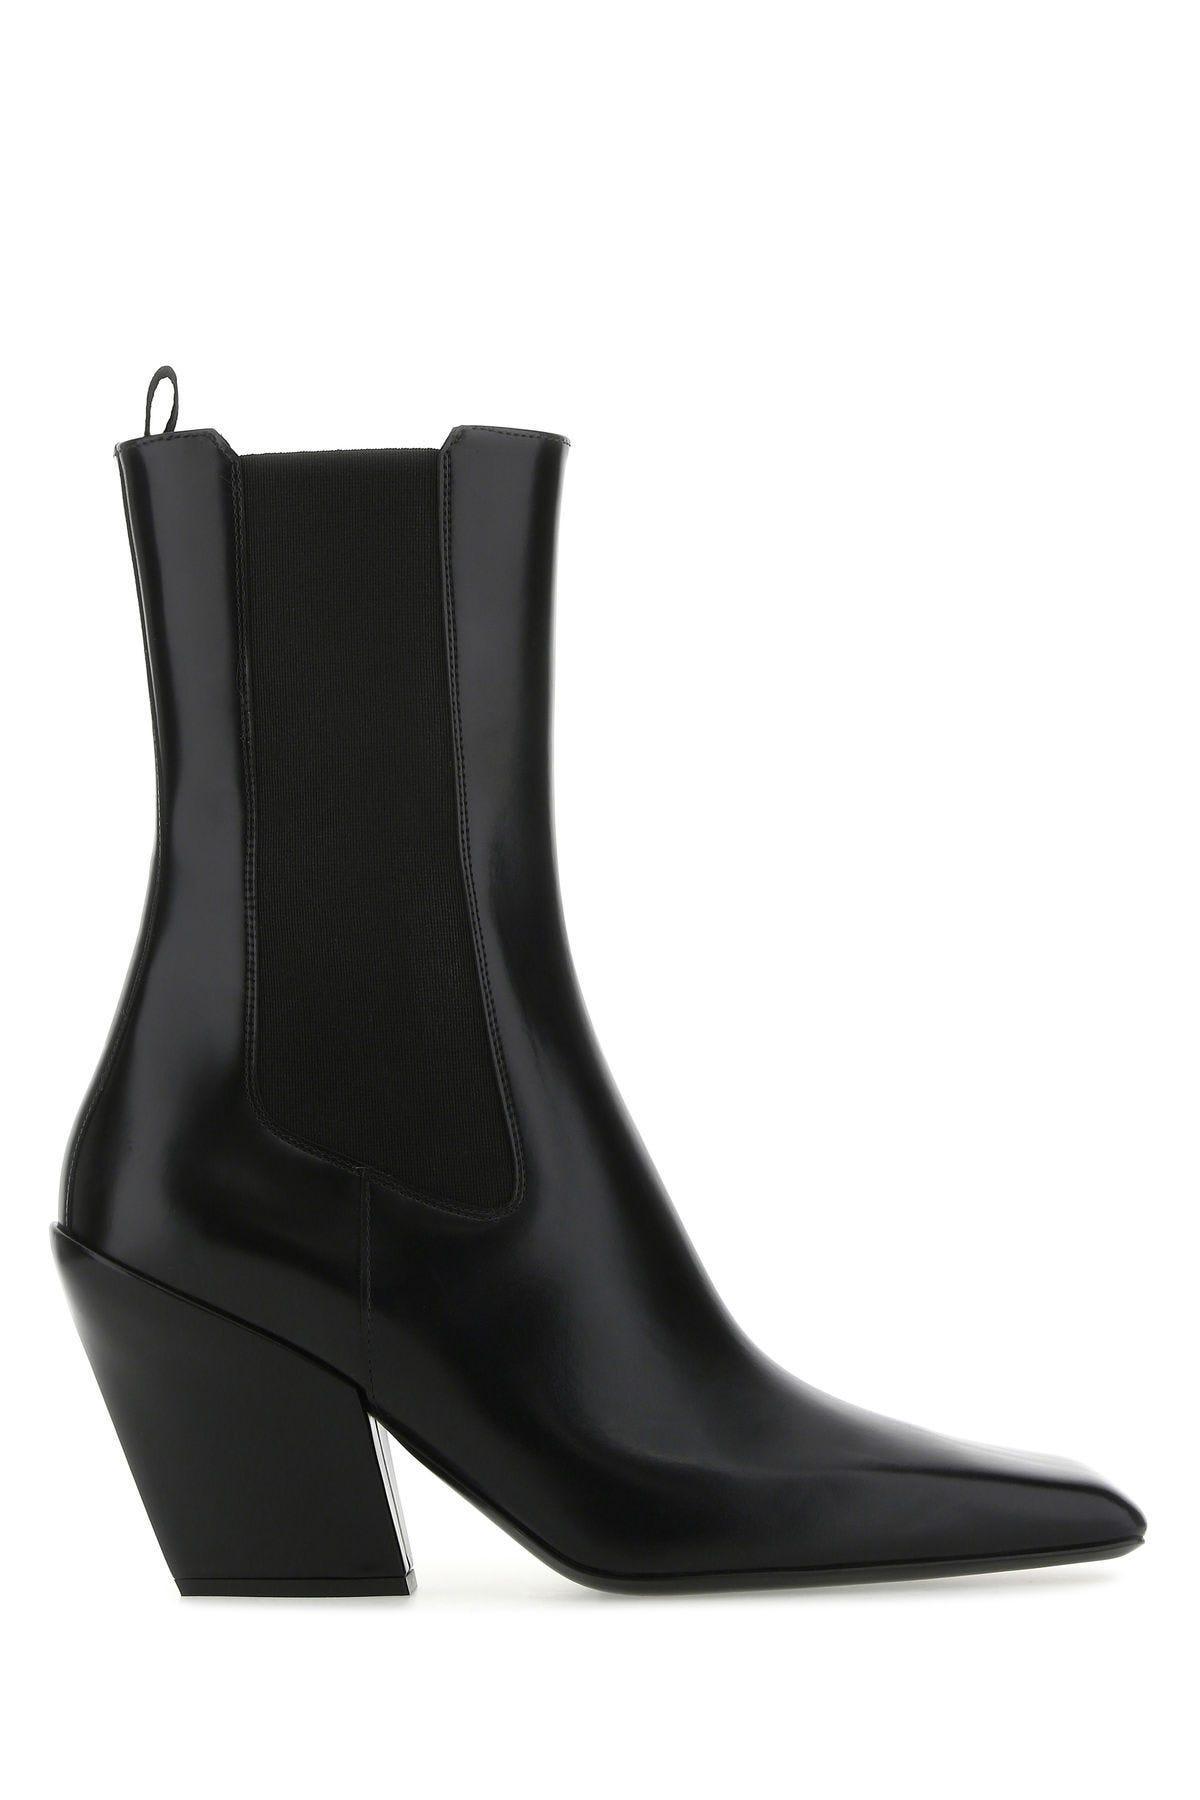 Prada Black Leather Ankle Boots | Lyst